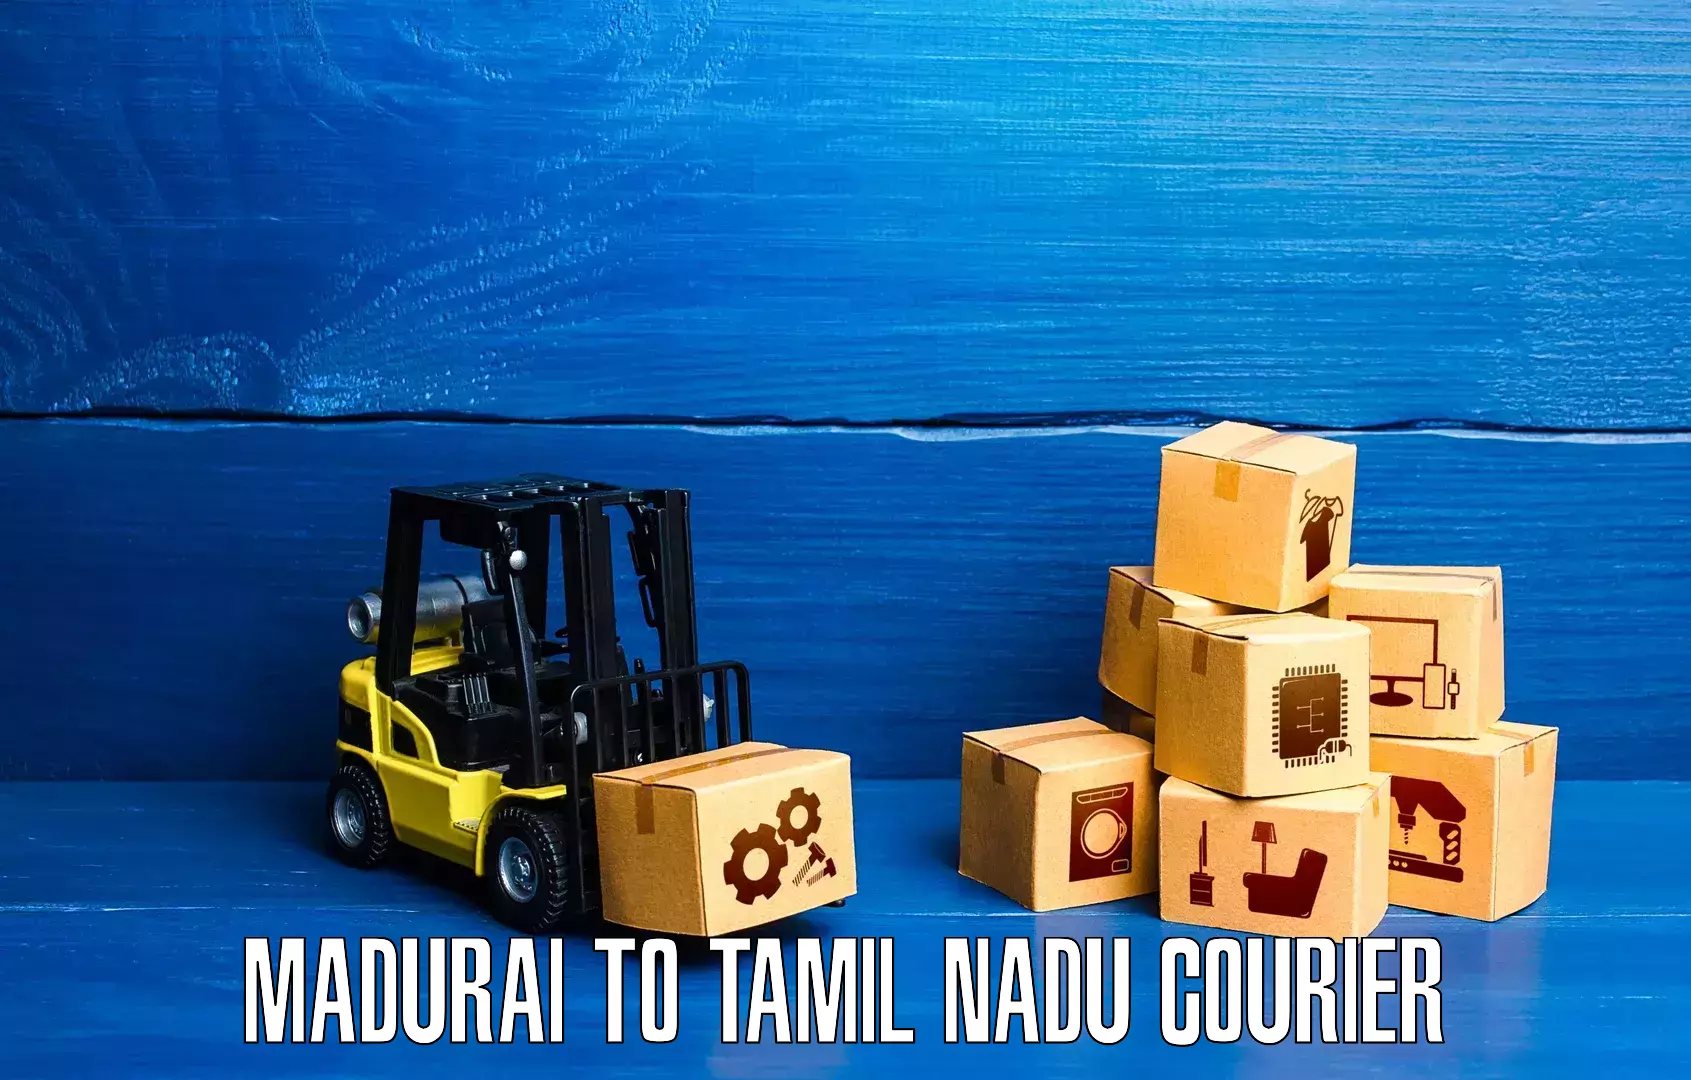 Express delivery capabilities Madurai to Tamil Nadu